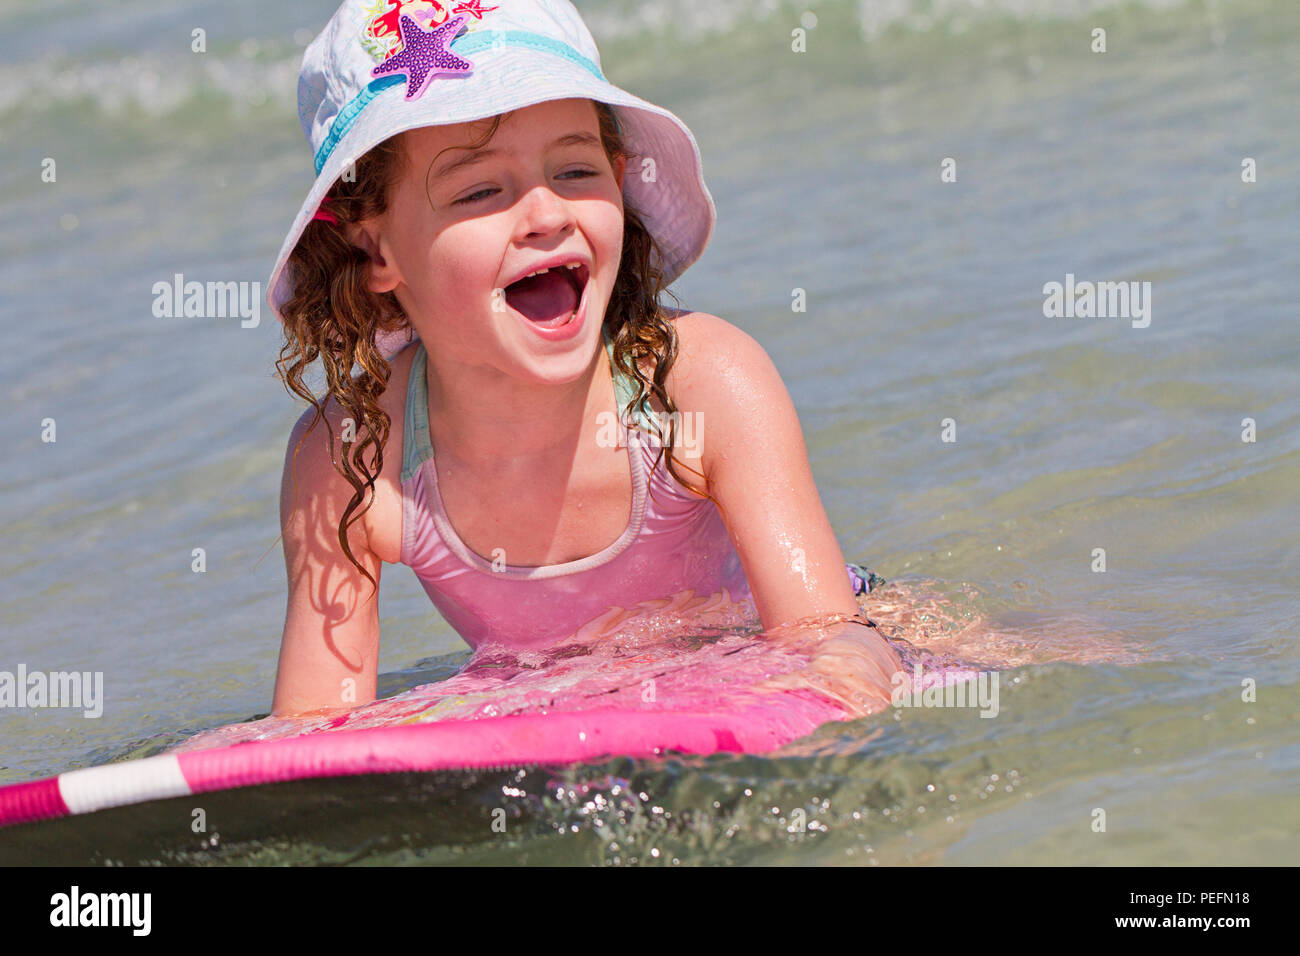 Happy girl sur body board laughing Banque D'Images